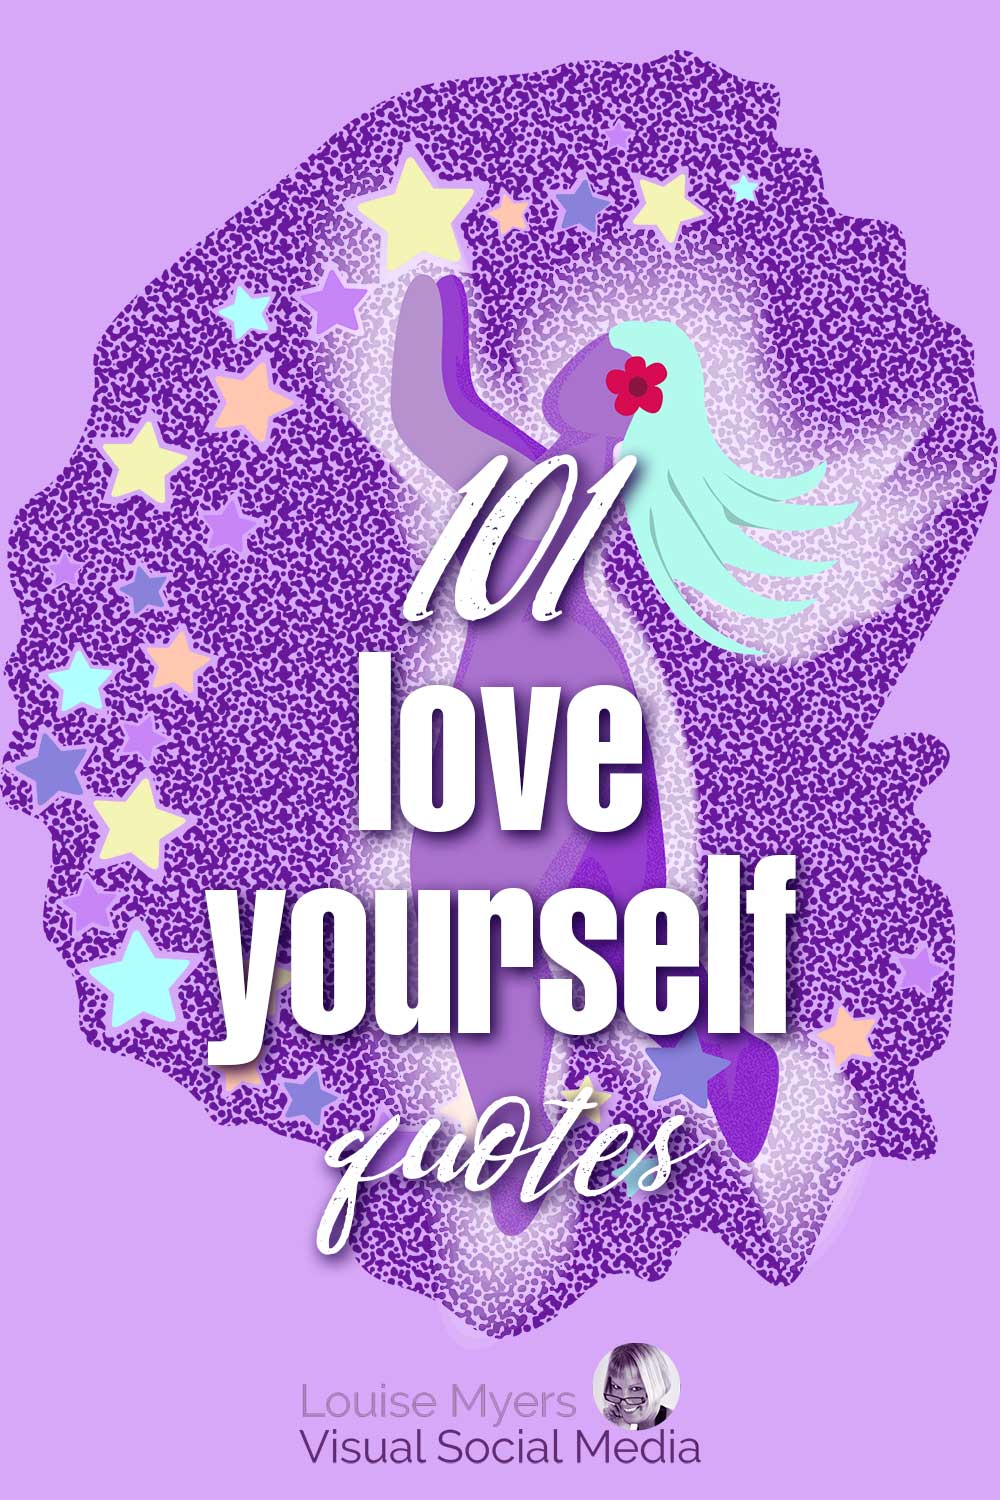 illustrated art of woman reaching for stars says 101 love yourself quotes.